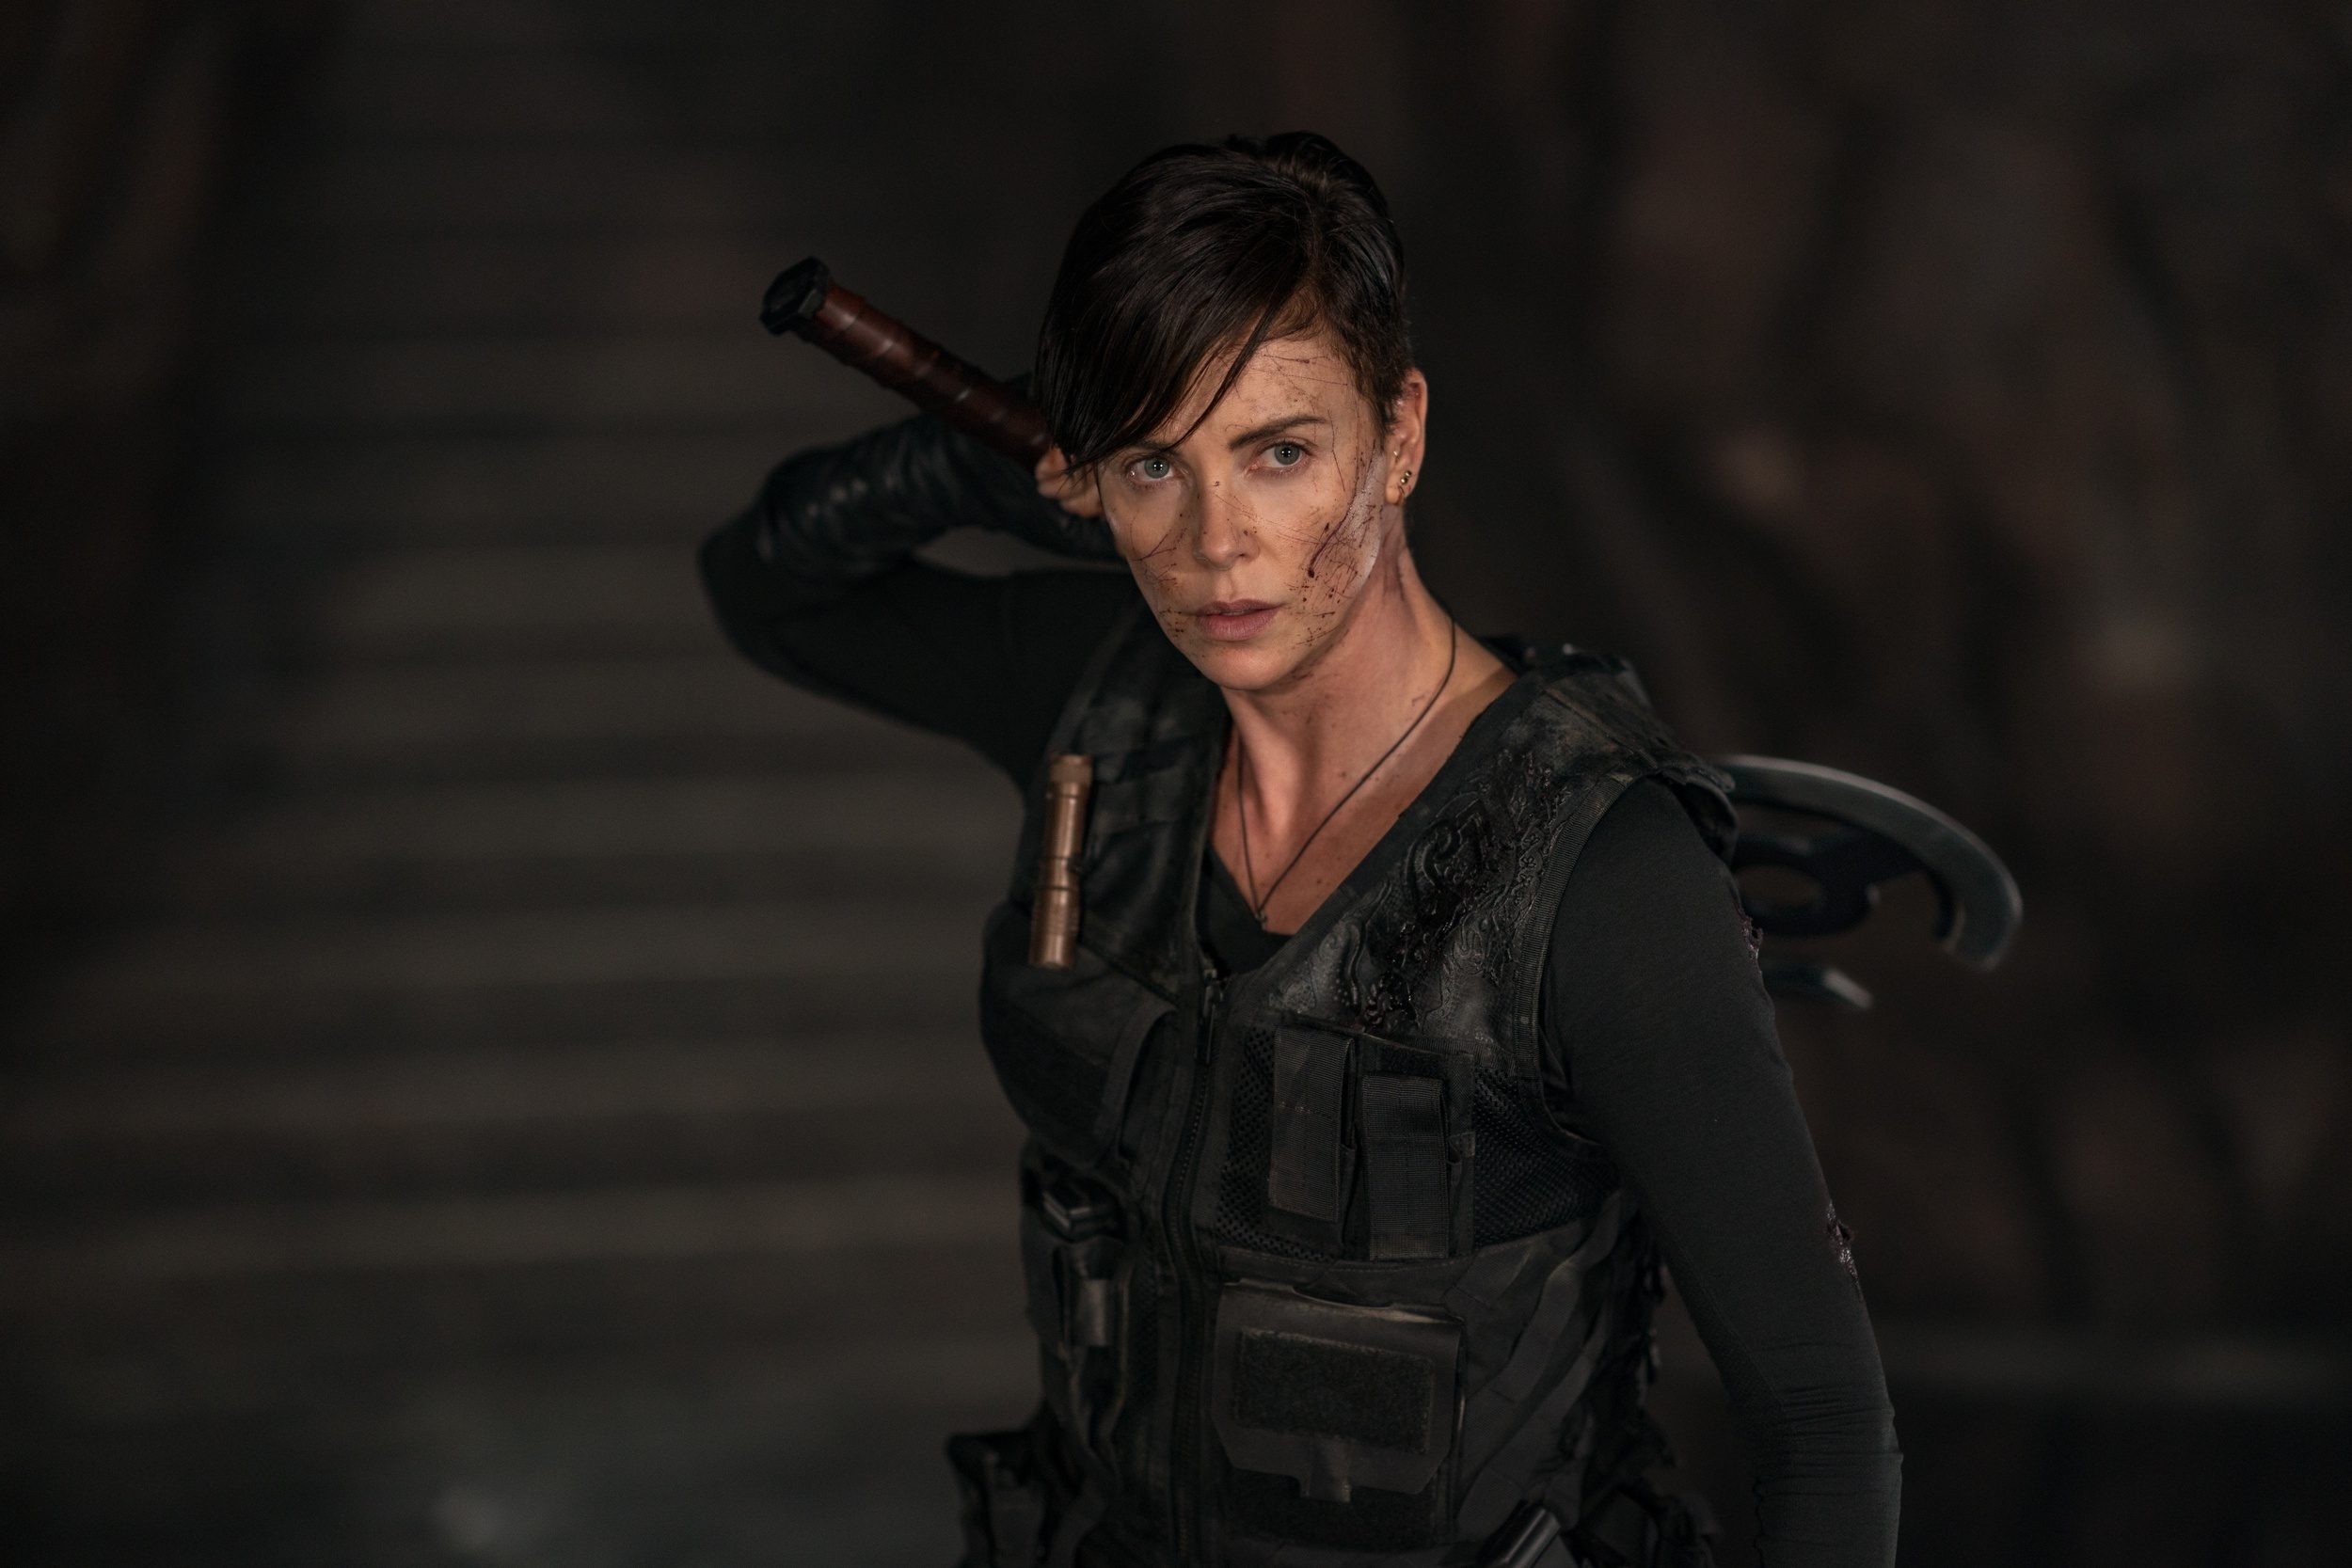 <p>Charlize Theron stars as an immortal warrior in the 2020 action flick <em>The Old Guard</em>. Andy, played by Theron, leads a group of mercenaries who have the ability to heal themselves and, therefore, cannot die. When their secret is exposed, they must fight for their survival. The film features impressive action pieces and a strong narrative that focuses on the burden of immortality. All the characters bring an emotional weight with them that the audience will invest in.</p><p>You may also like: <a href='https://www.yardbarker.com/entertainment/articles/20_actors_who_need_to_join_the_snl_five_timers_club/s1__39987816'>20 actors who need to join the 'SNL' Five-Timers Club</a></p>